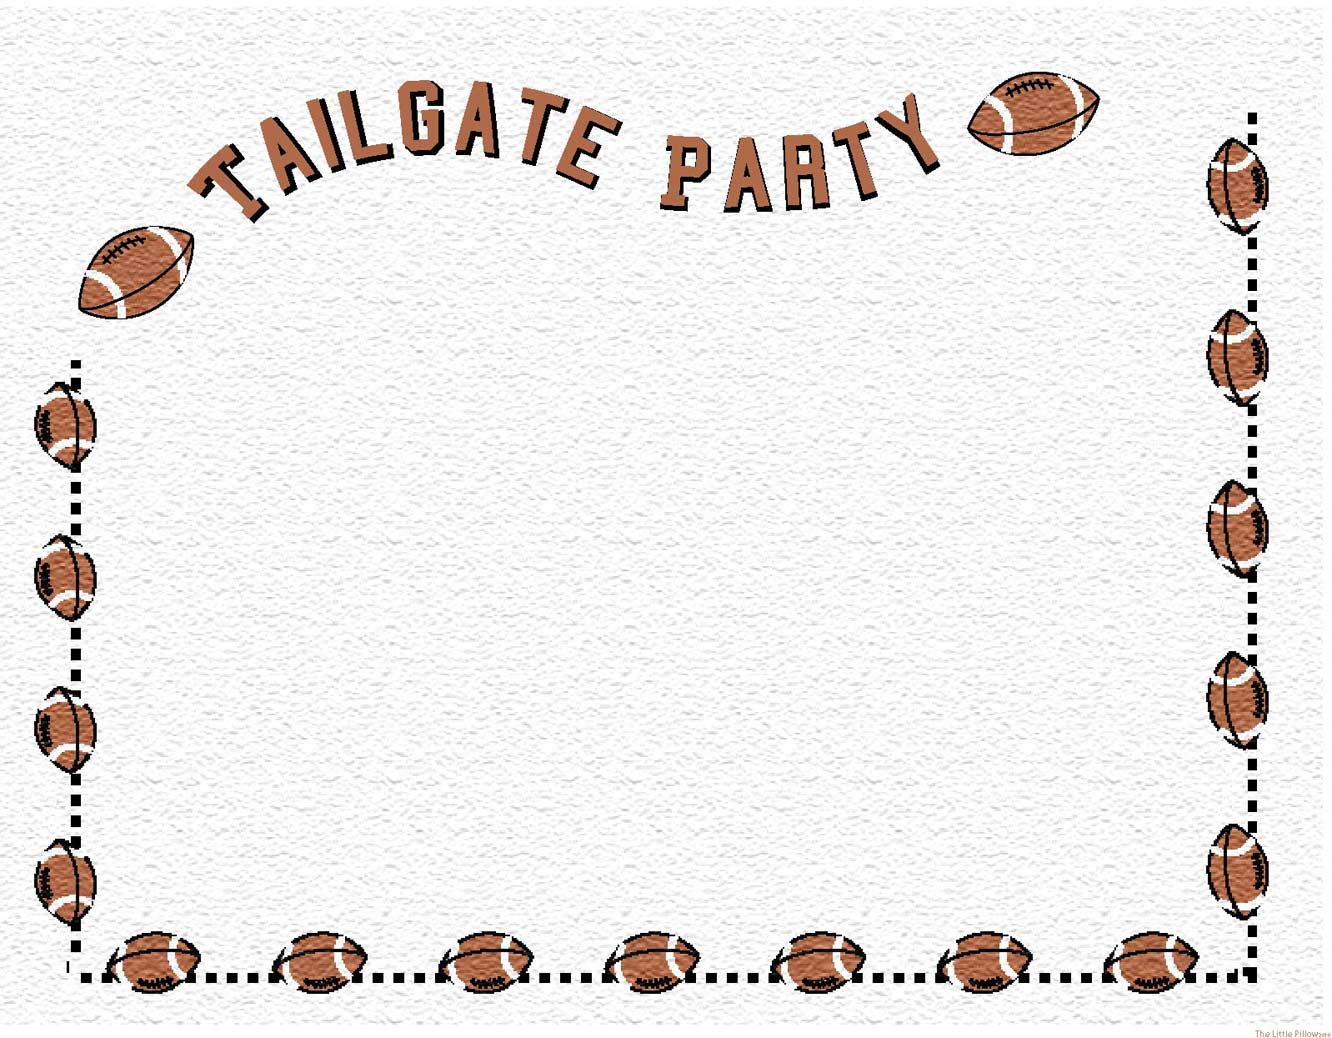 tailgate party